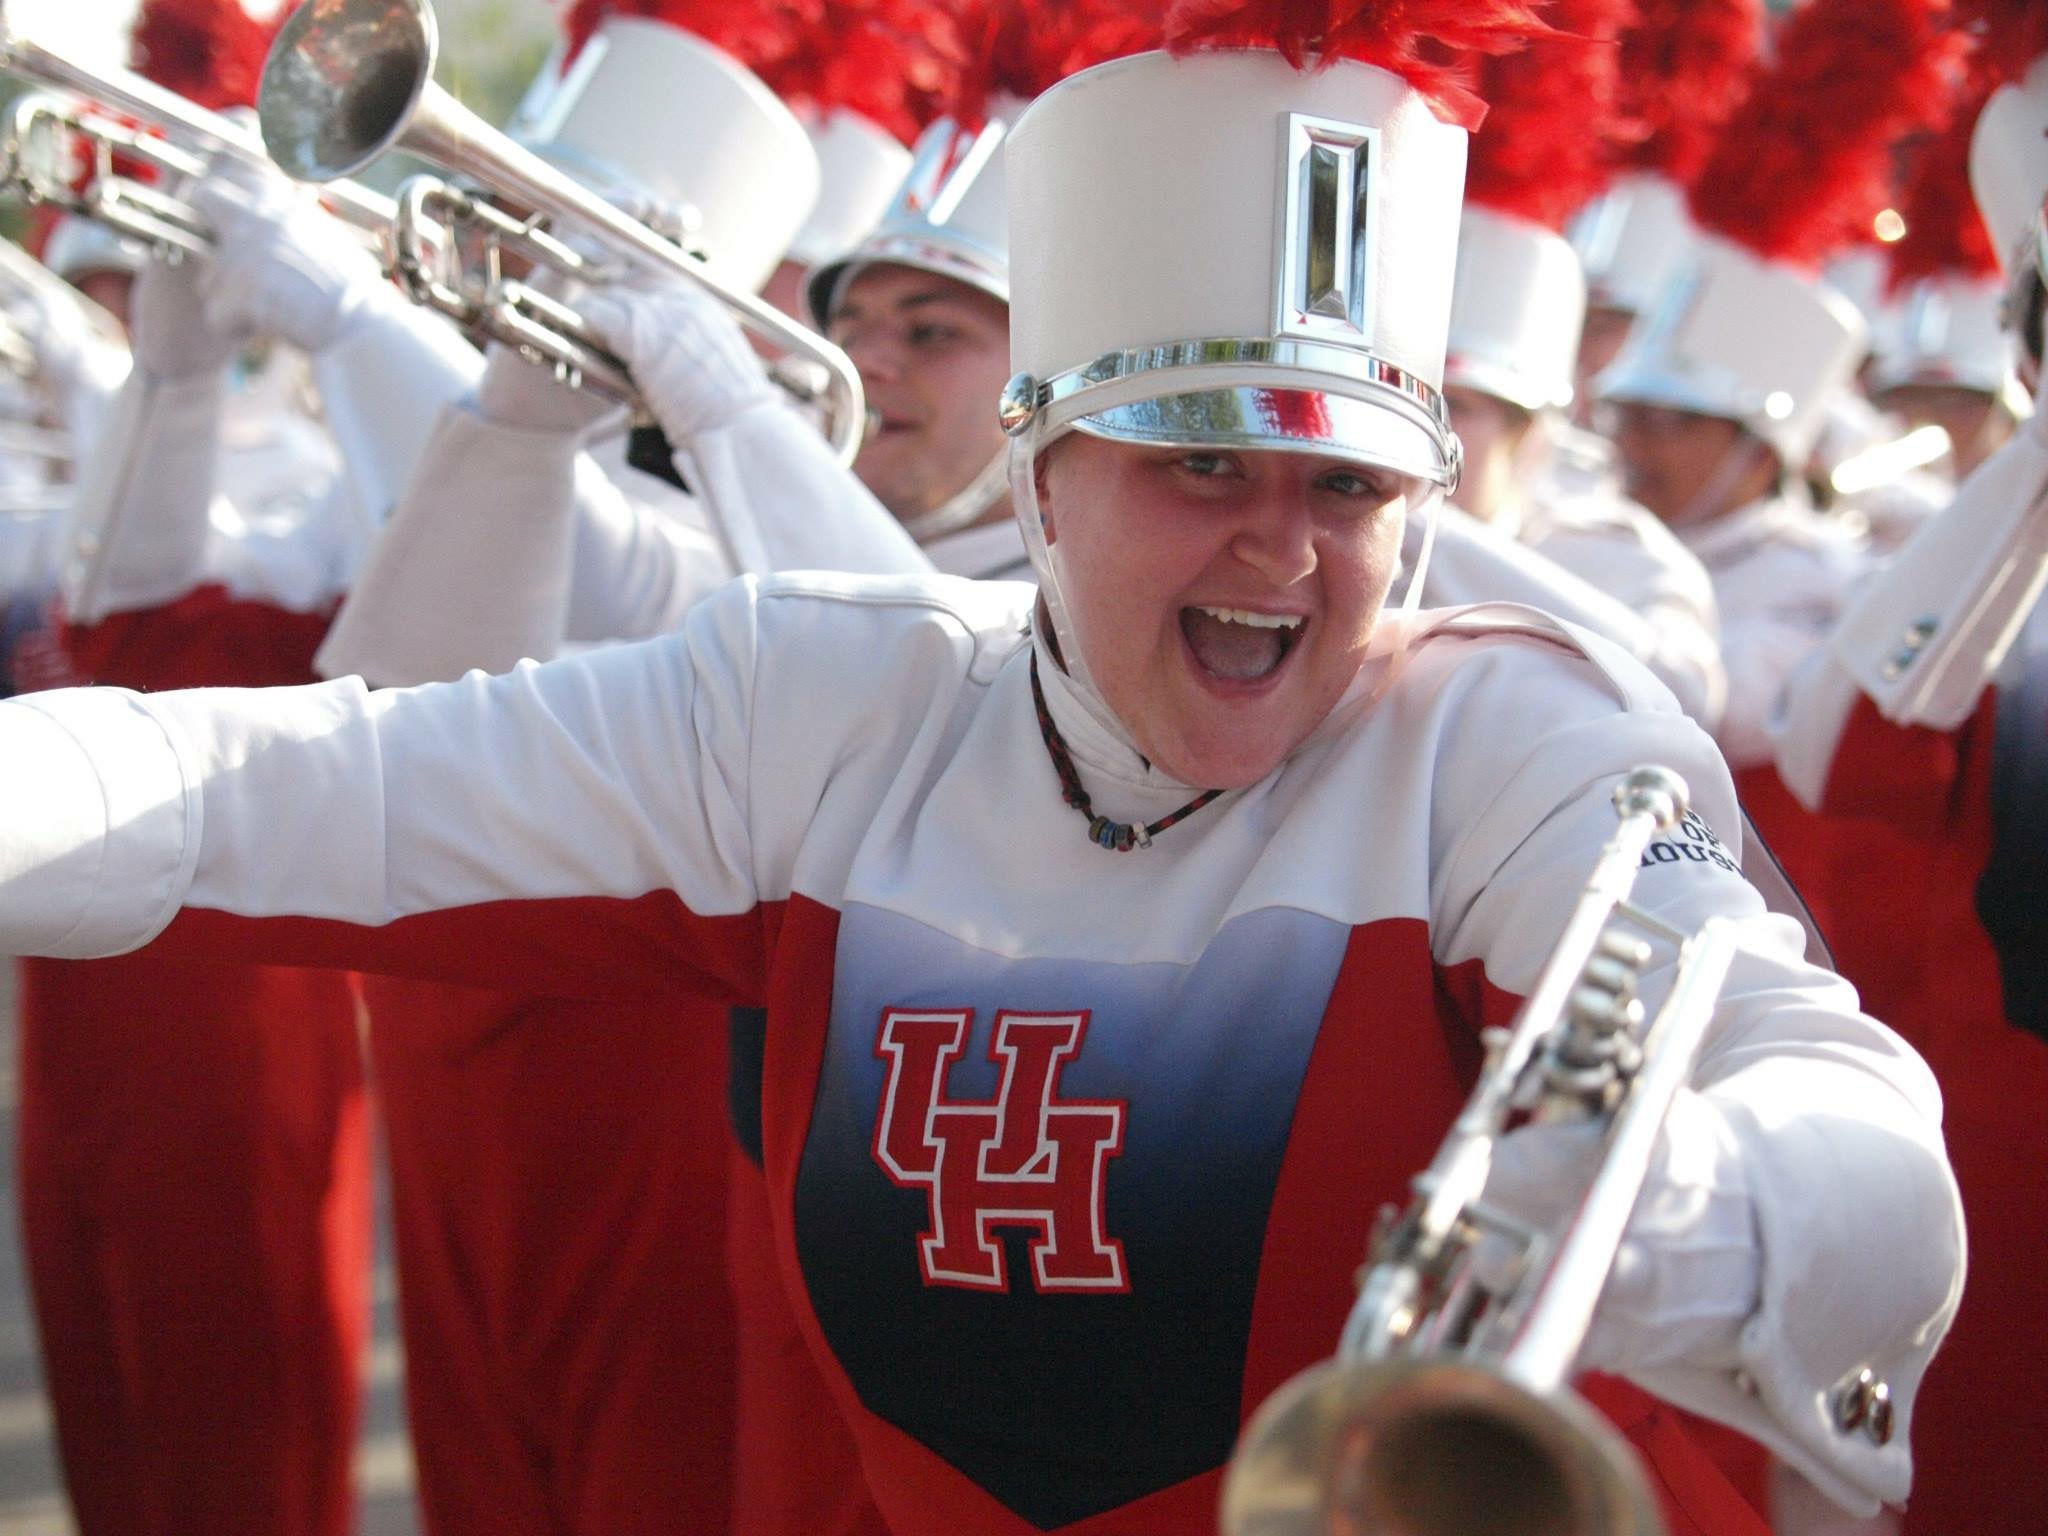 UH Supporting Jan. 18 MLK Day Parade in Houston University of Houston